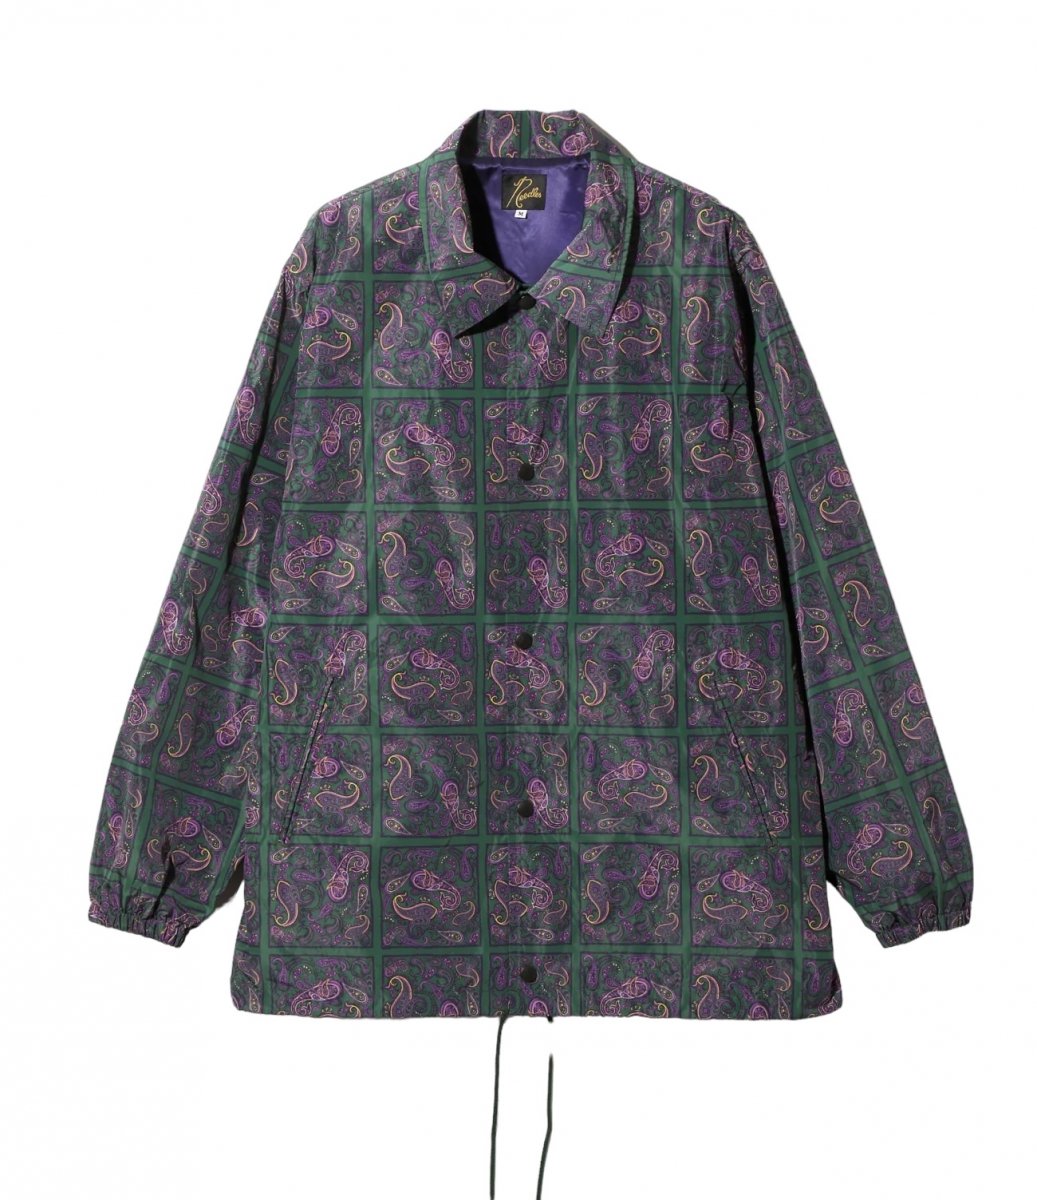 NEEDLES <BR>Coach Jacket - Poly Taffeta / Printed Red Square - (GREEN)

